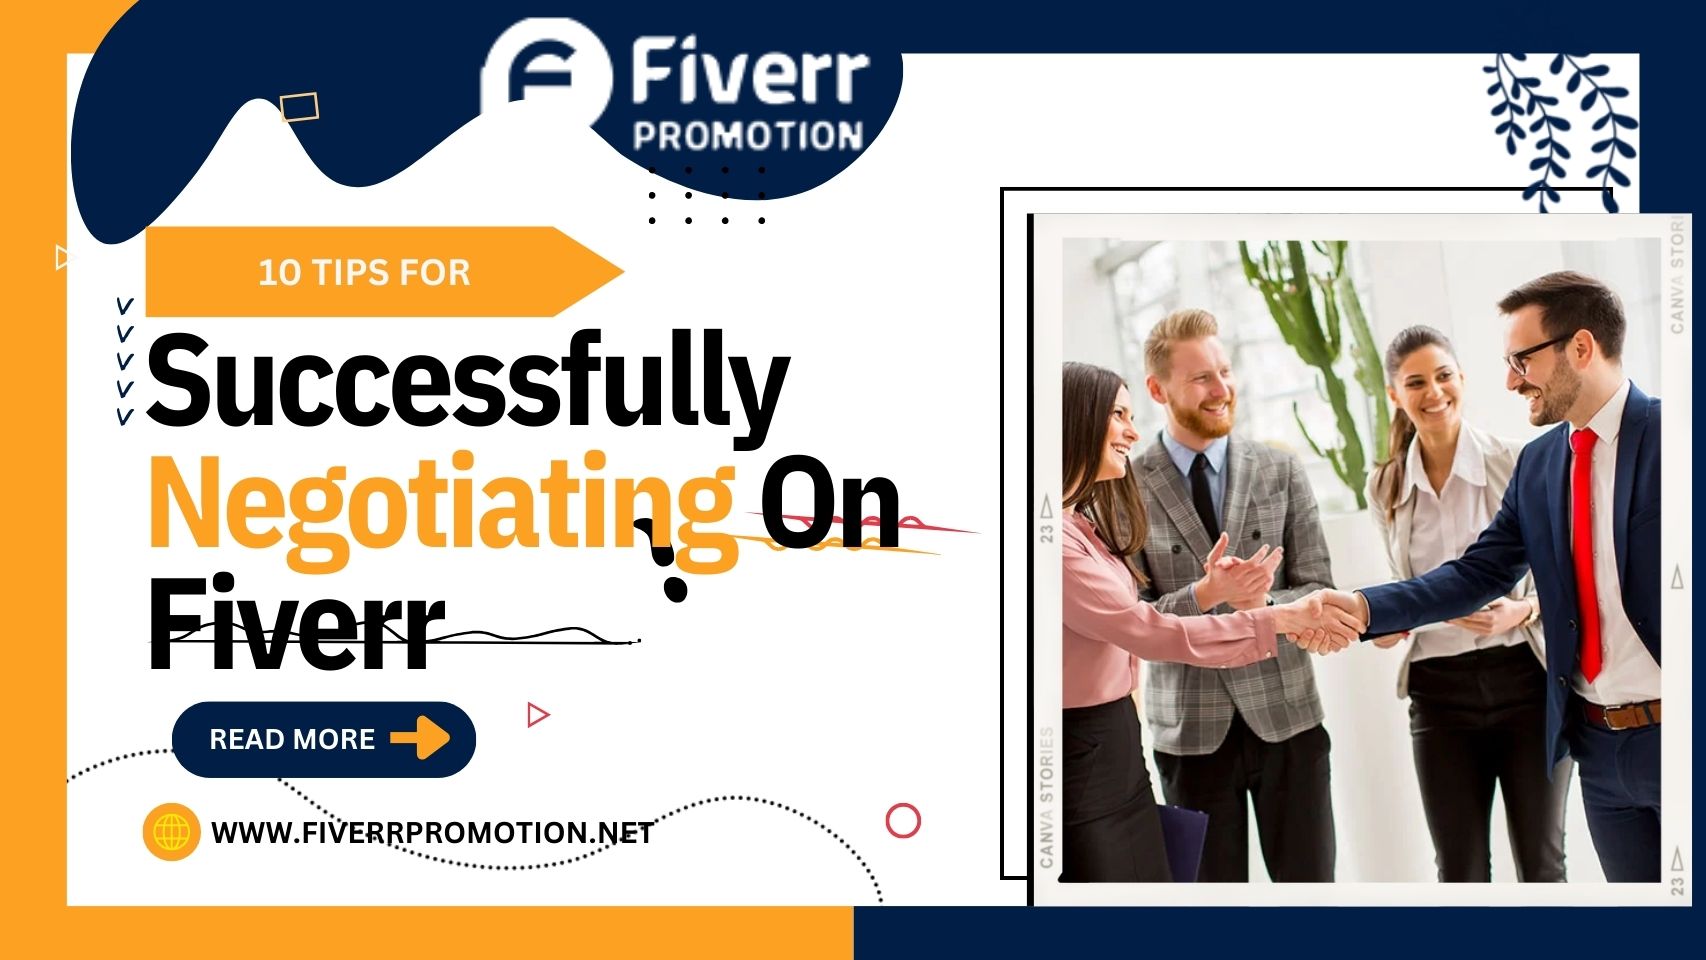 10 tips for successfully negotiating on Fiverr